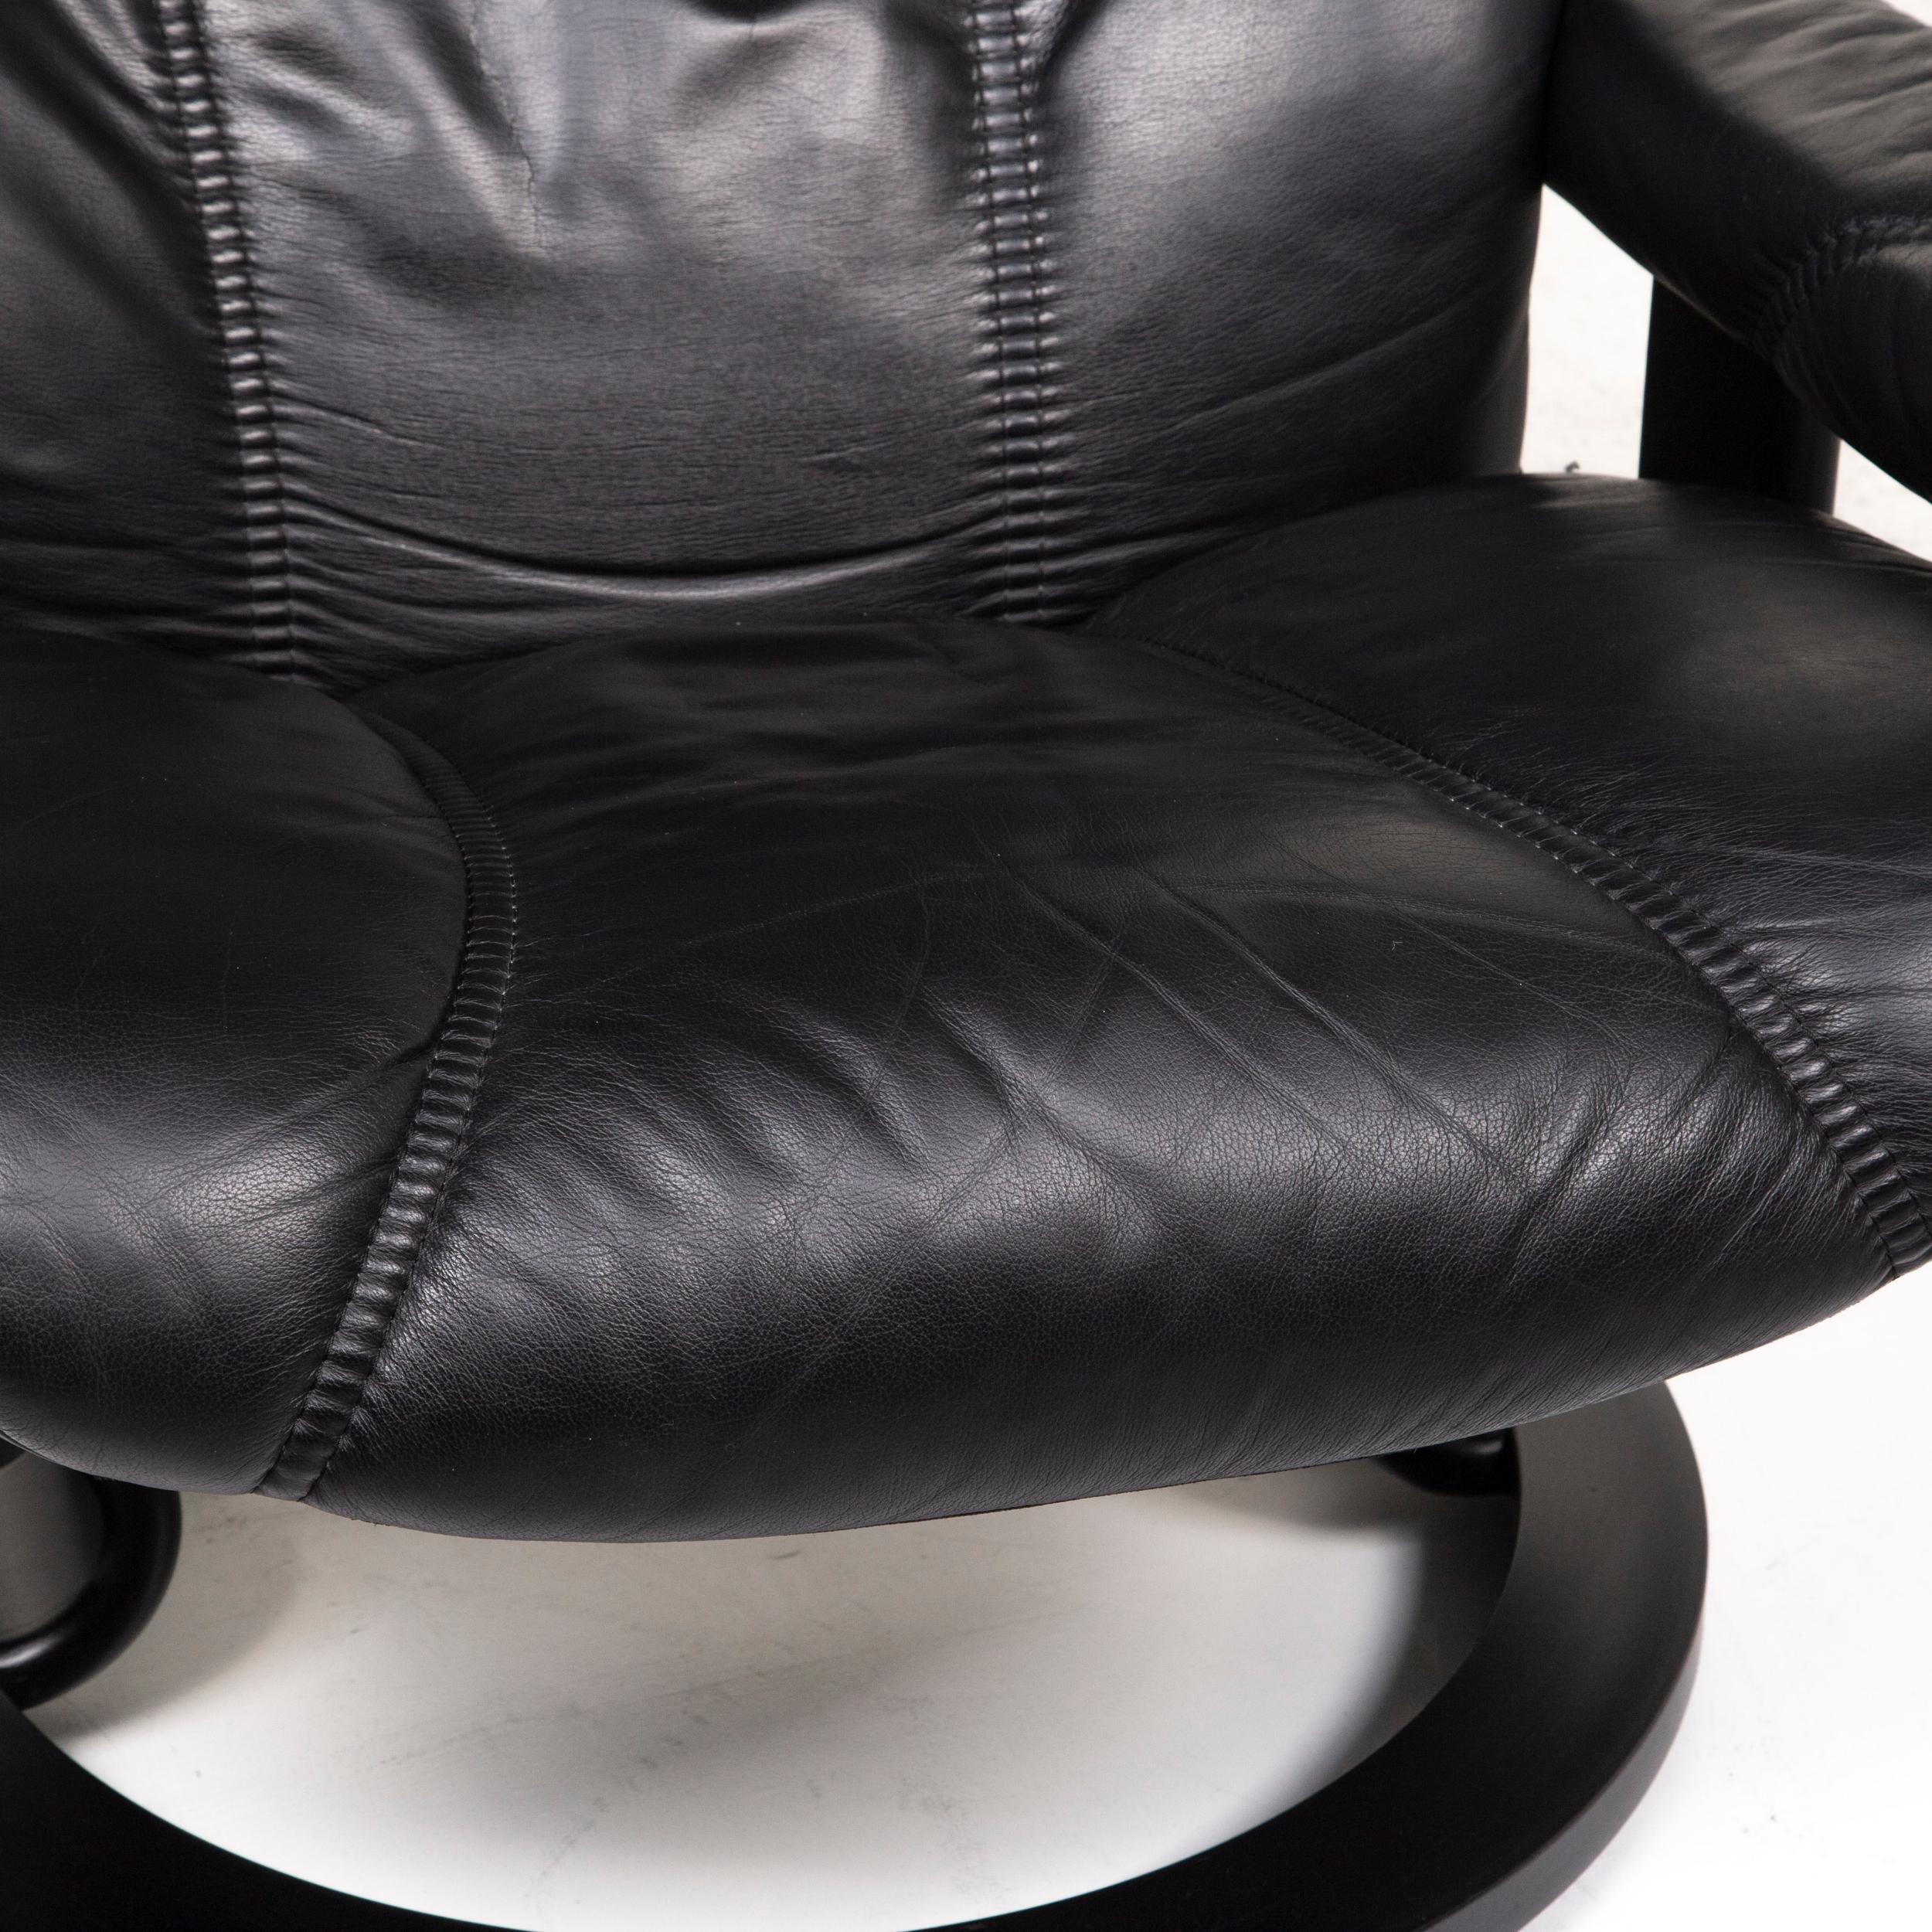 We bring to you a Stressless Consul leather armchair incl. Black stool size L function relax.

 

 Product measurements in centimeters:
 

Depth 75
Width 84
Height 100
Seat-height 42
Rest-height 52
Seat-depth 48
Seat-width